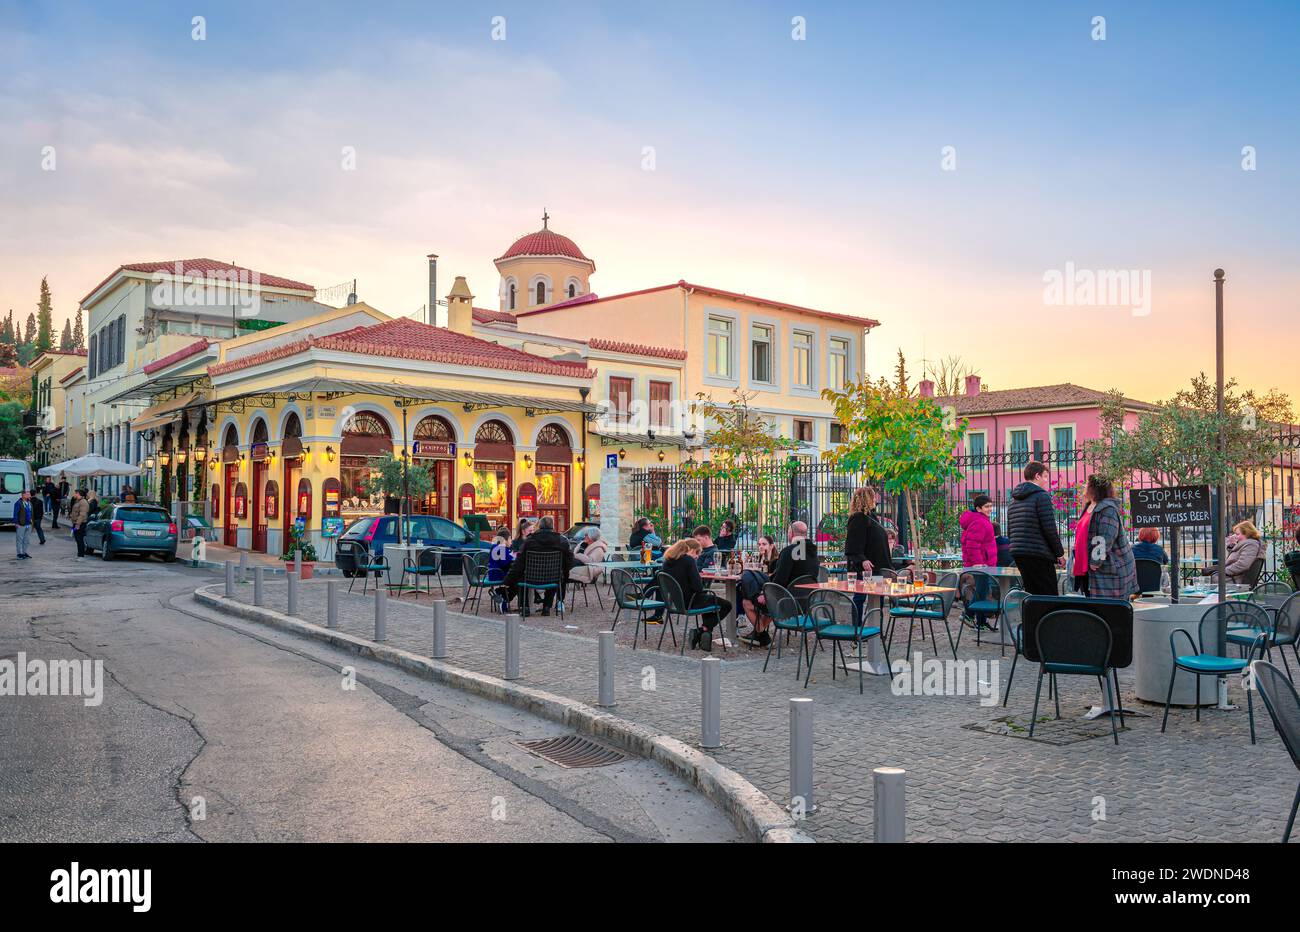 People in sidewalk café in Plaka, next to the Roman Agora, with old and neoclassical buildings. Athens, Greece. Stock Photo